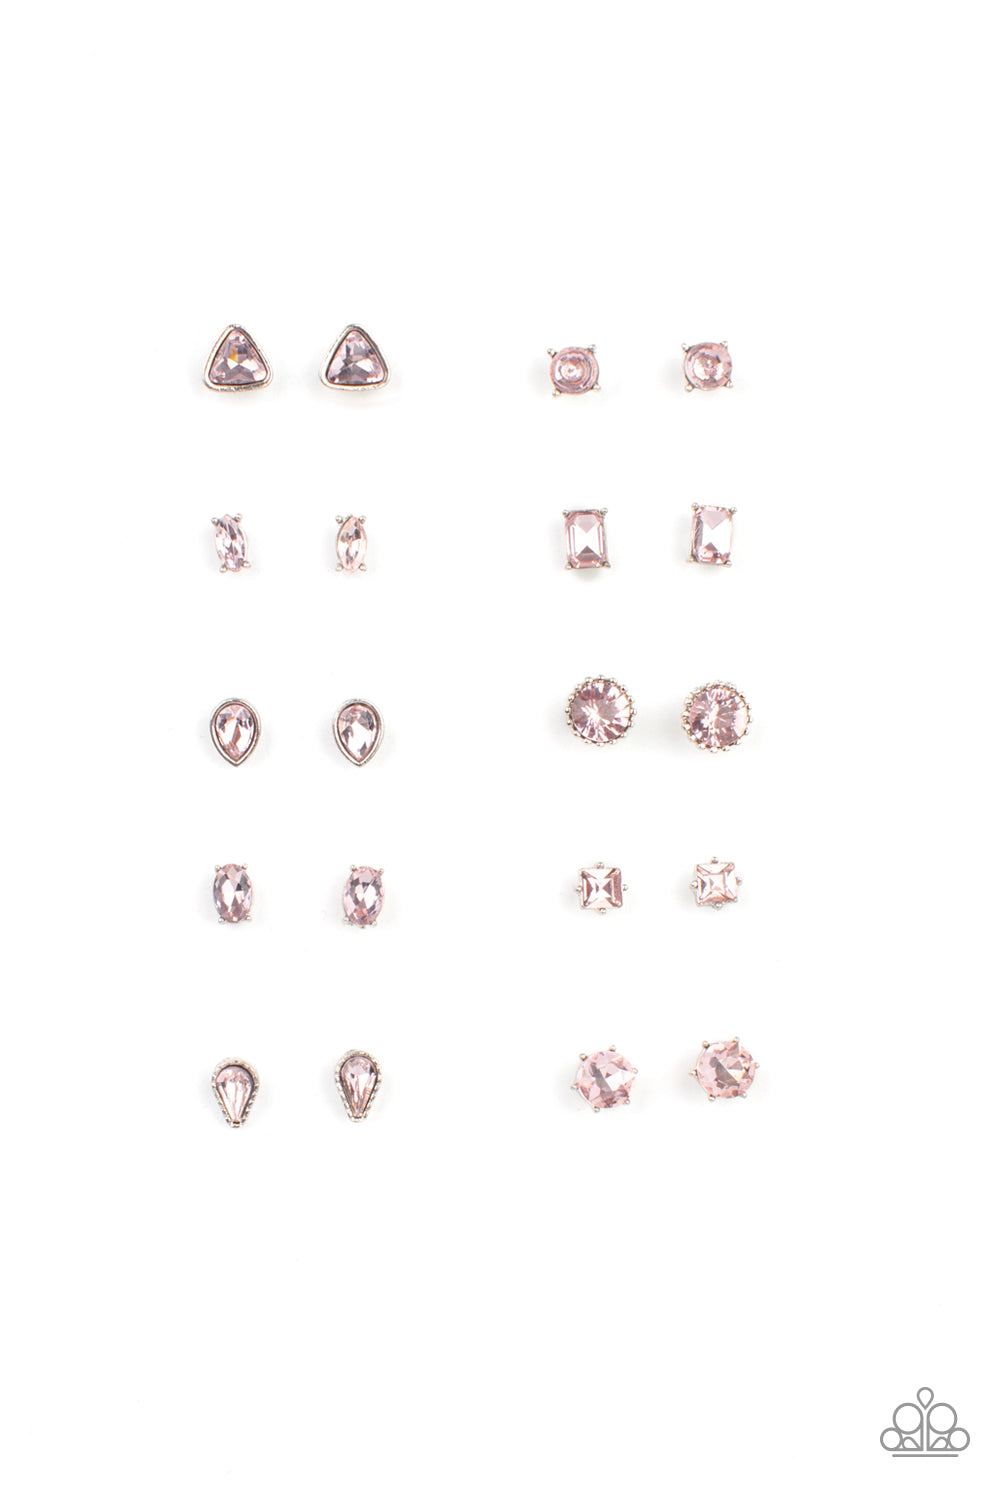 Paparazzi Starlet Shimmer Pink Rhinestones Post Earrings - A Finishing Touch Jewelry